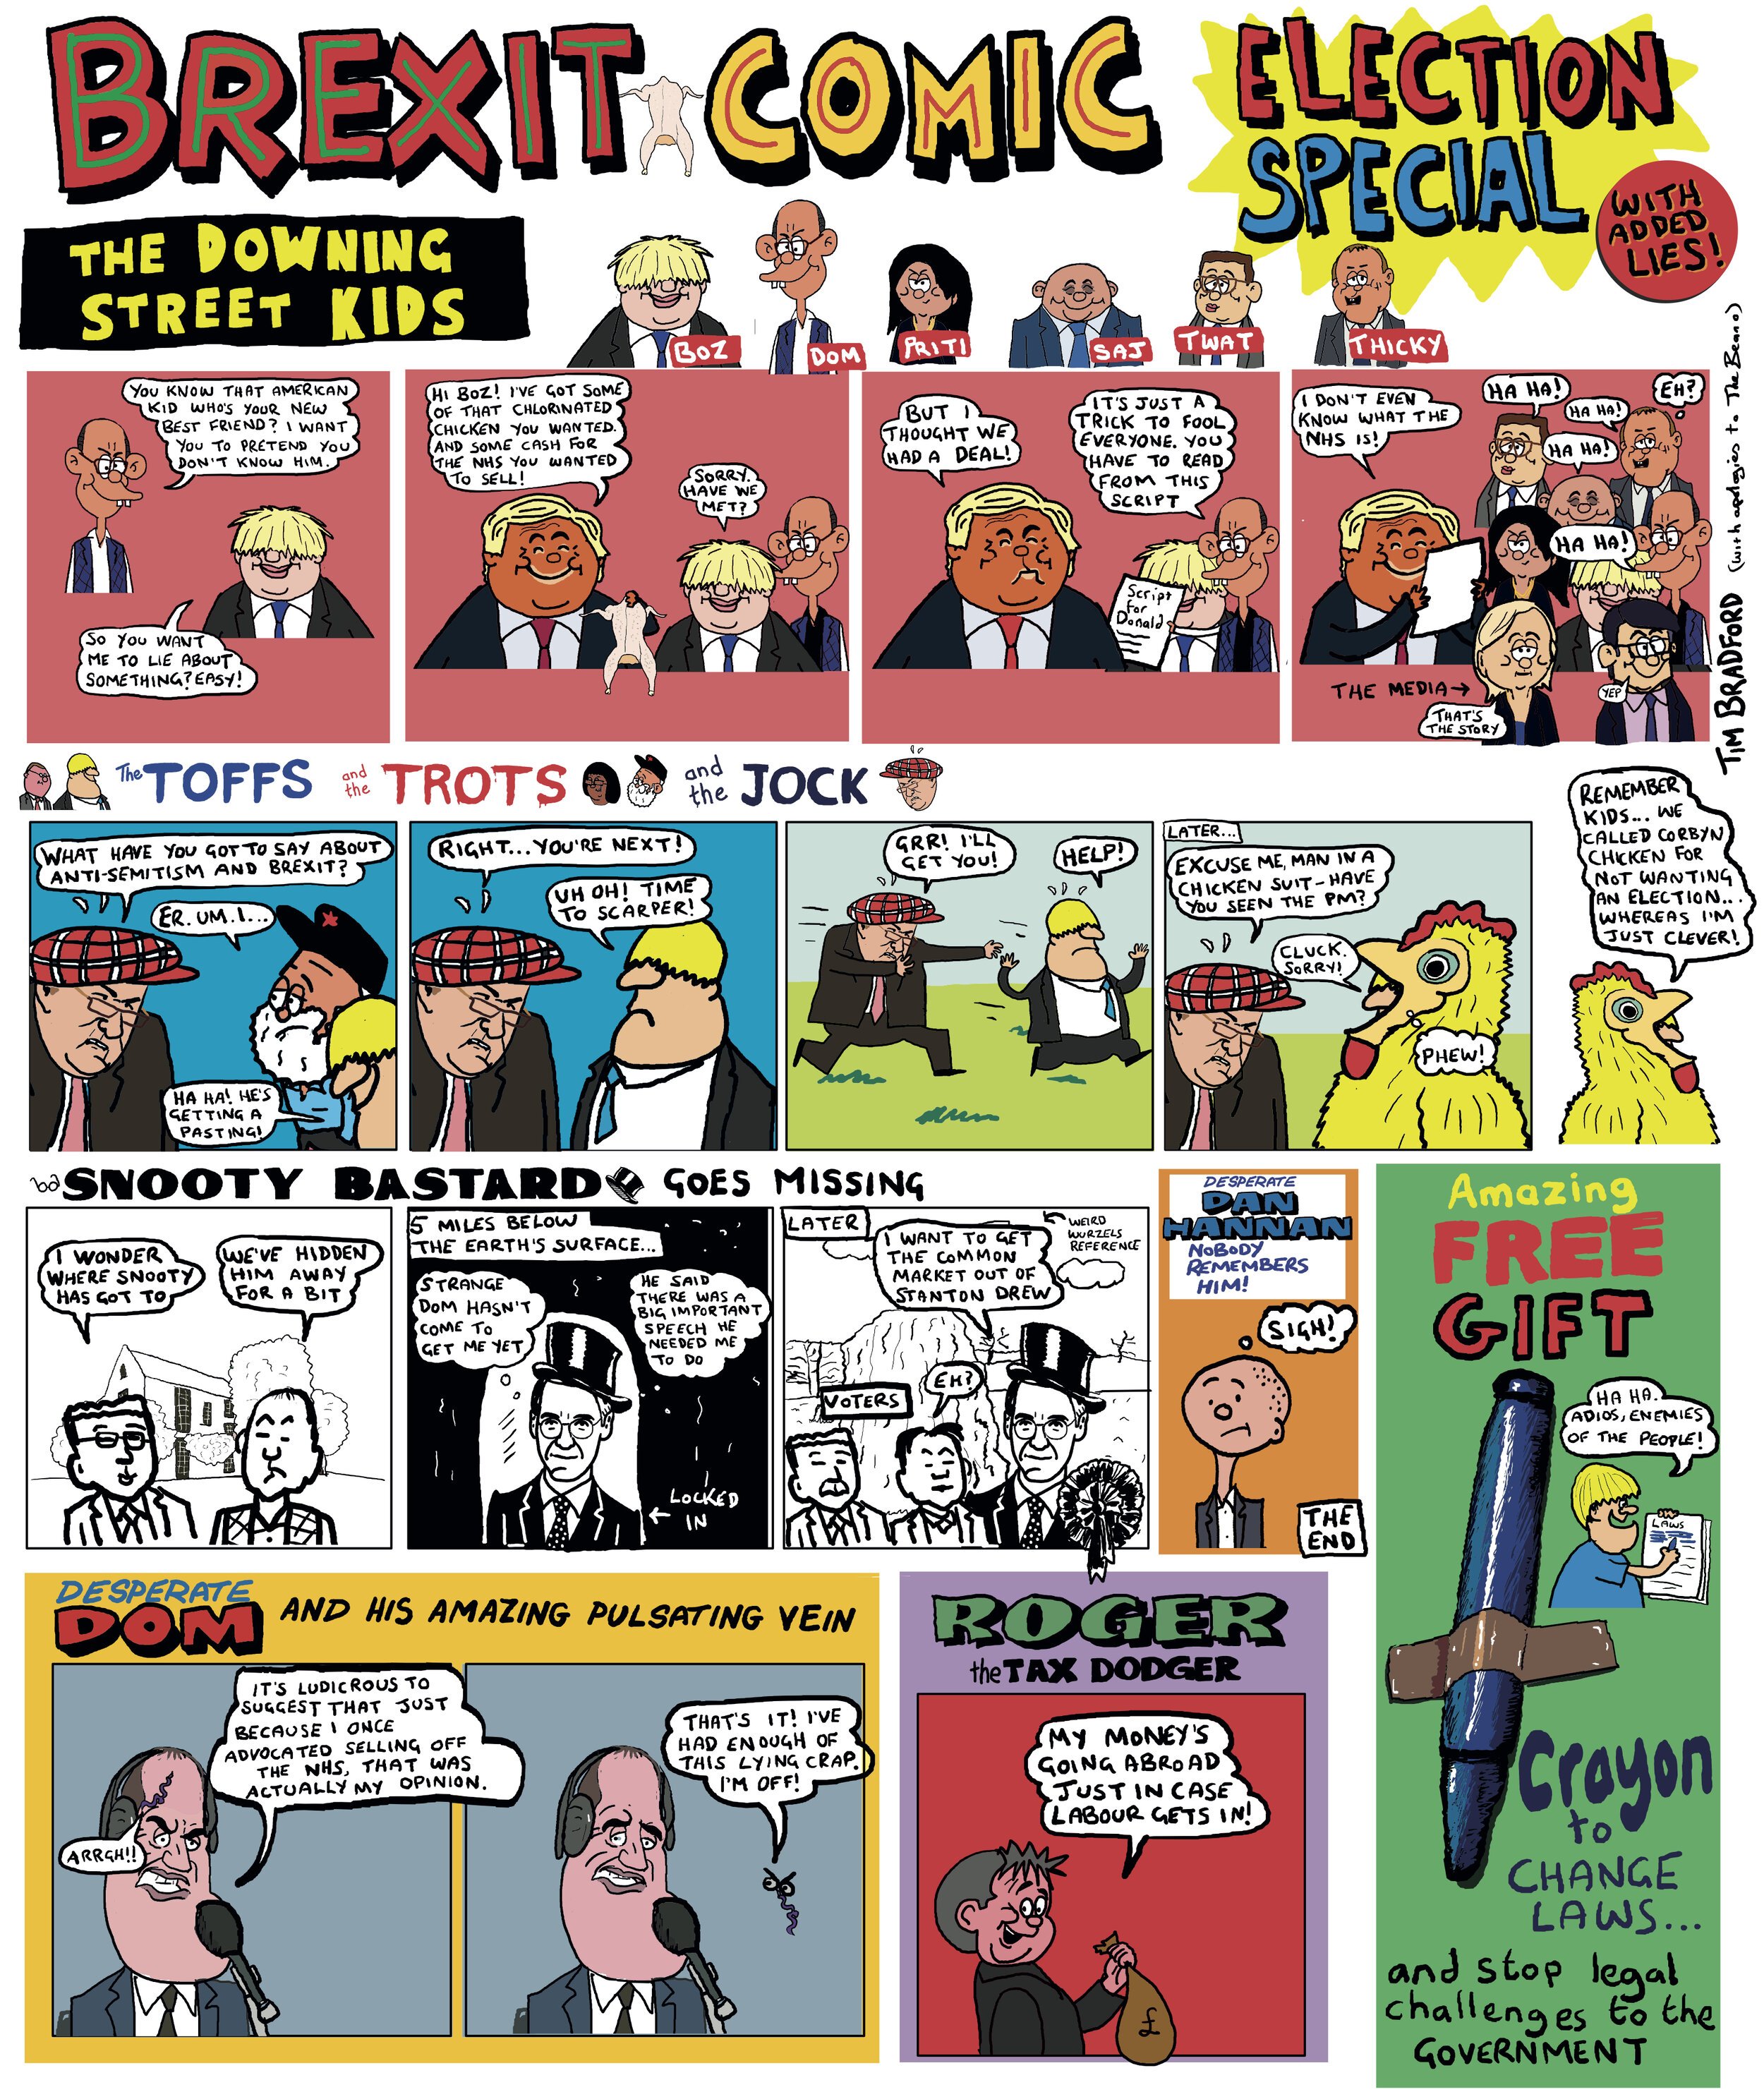 Brexit Comic: Election special - 05/12/19